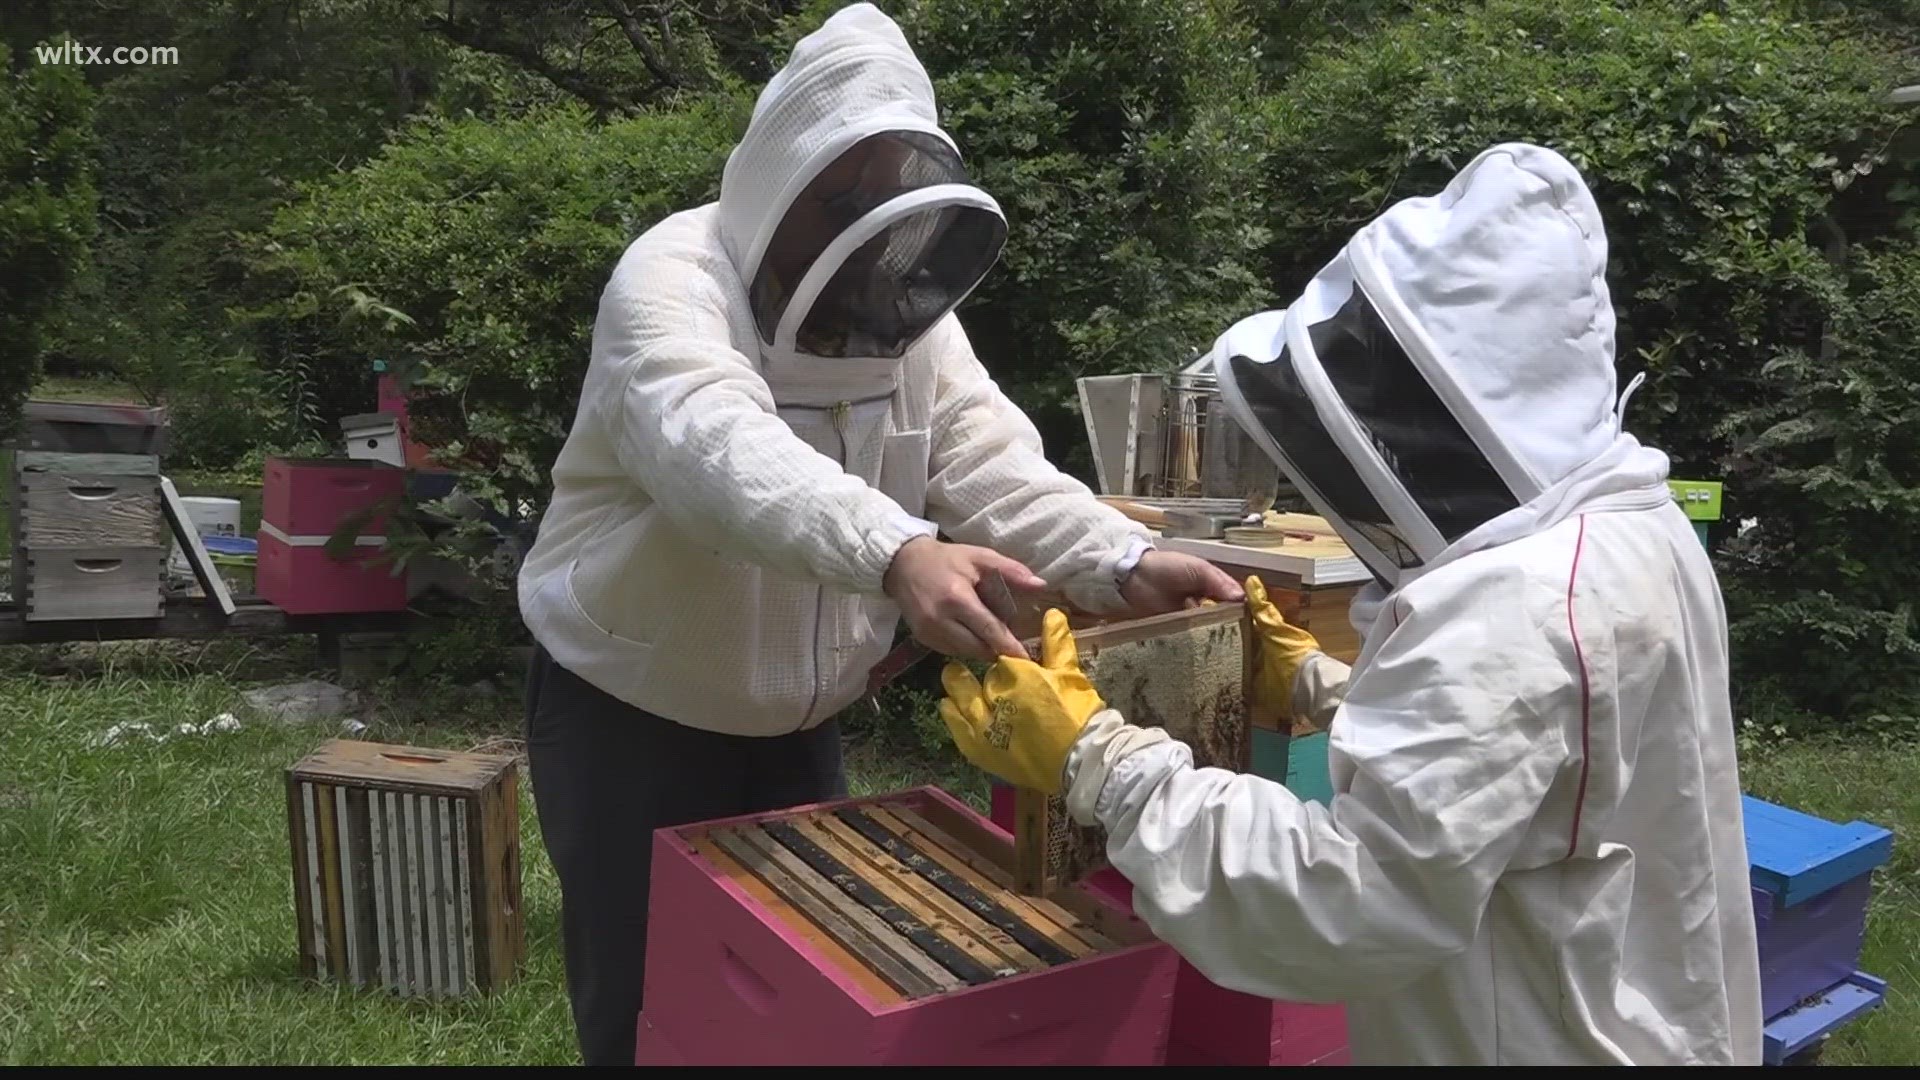 Honey is nearly a $2M a year industry in the state, keeping up with the costs is tough for local beekeepers.